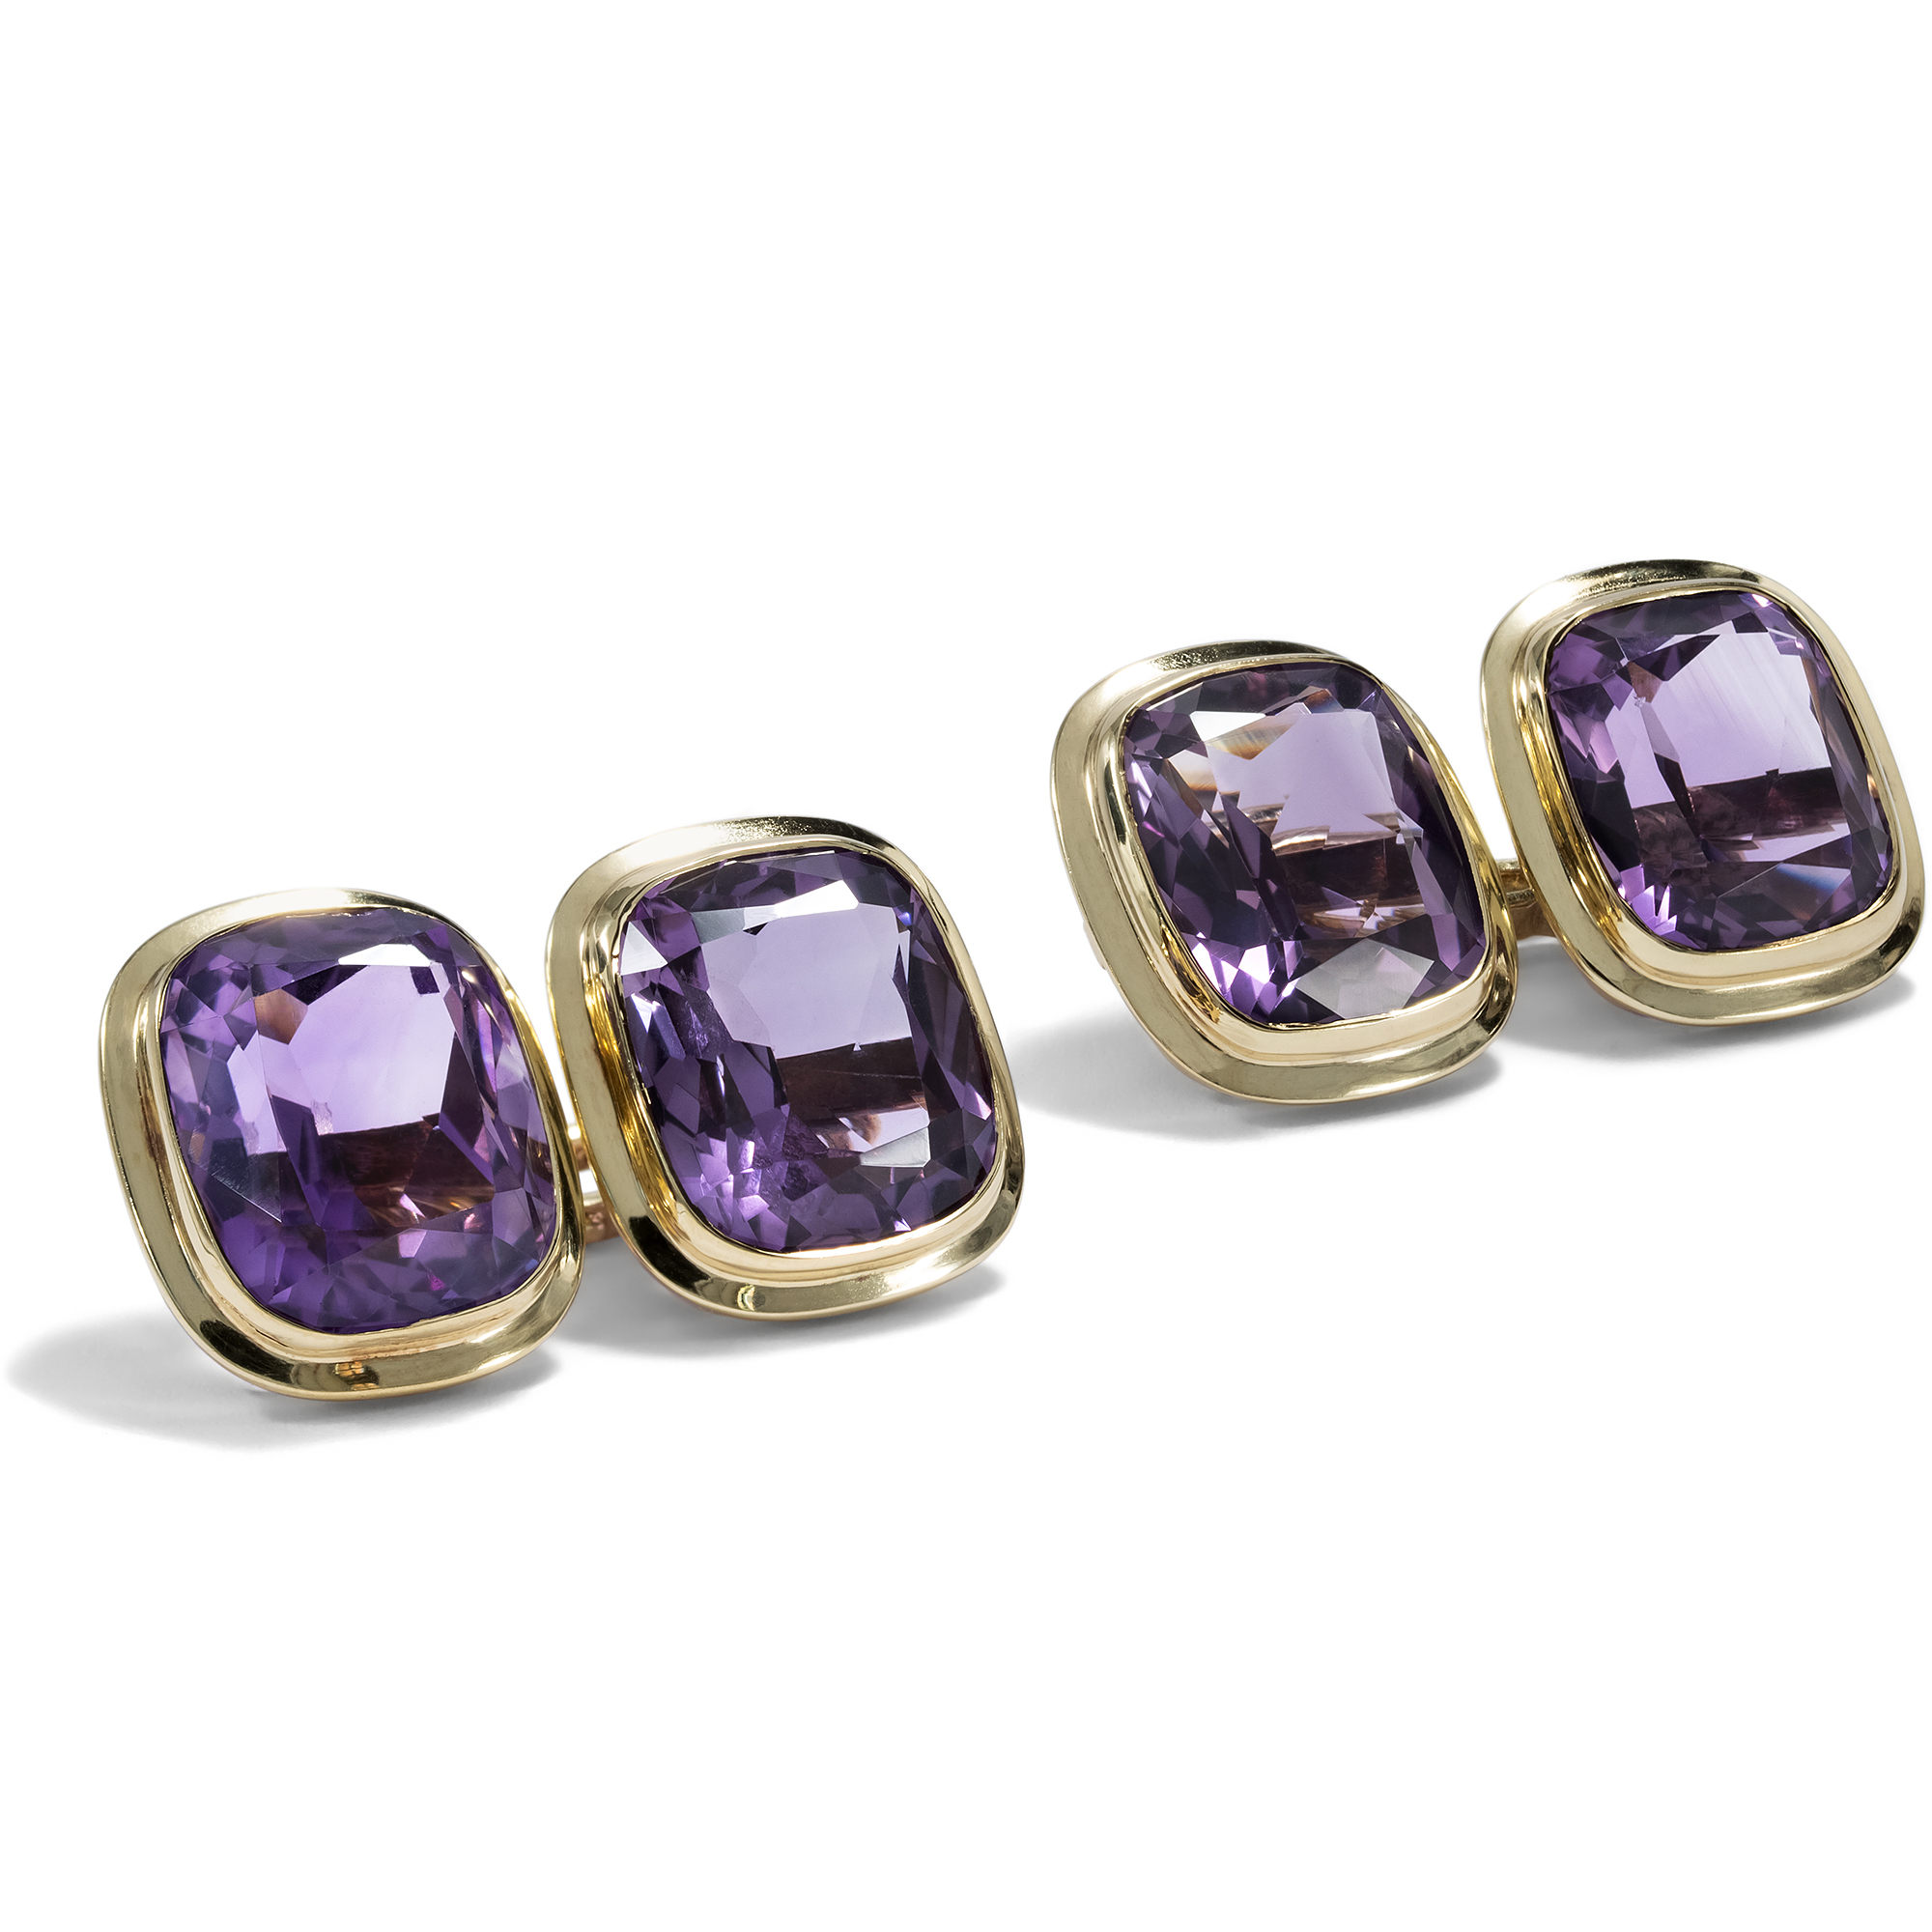 Vintage Gold Cufflinks with Amethysts, Germany c. 1960